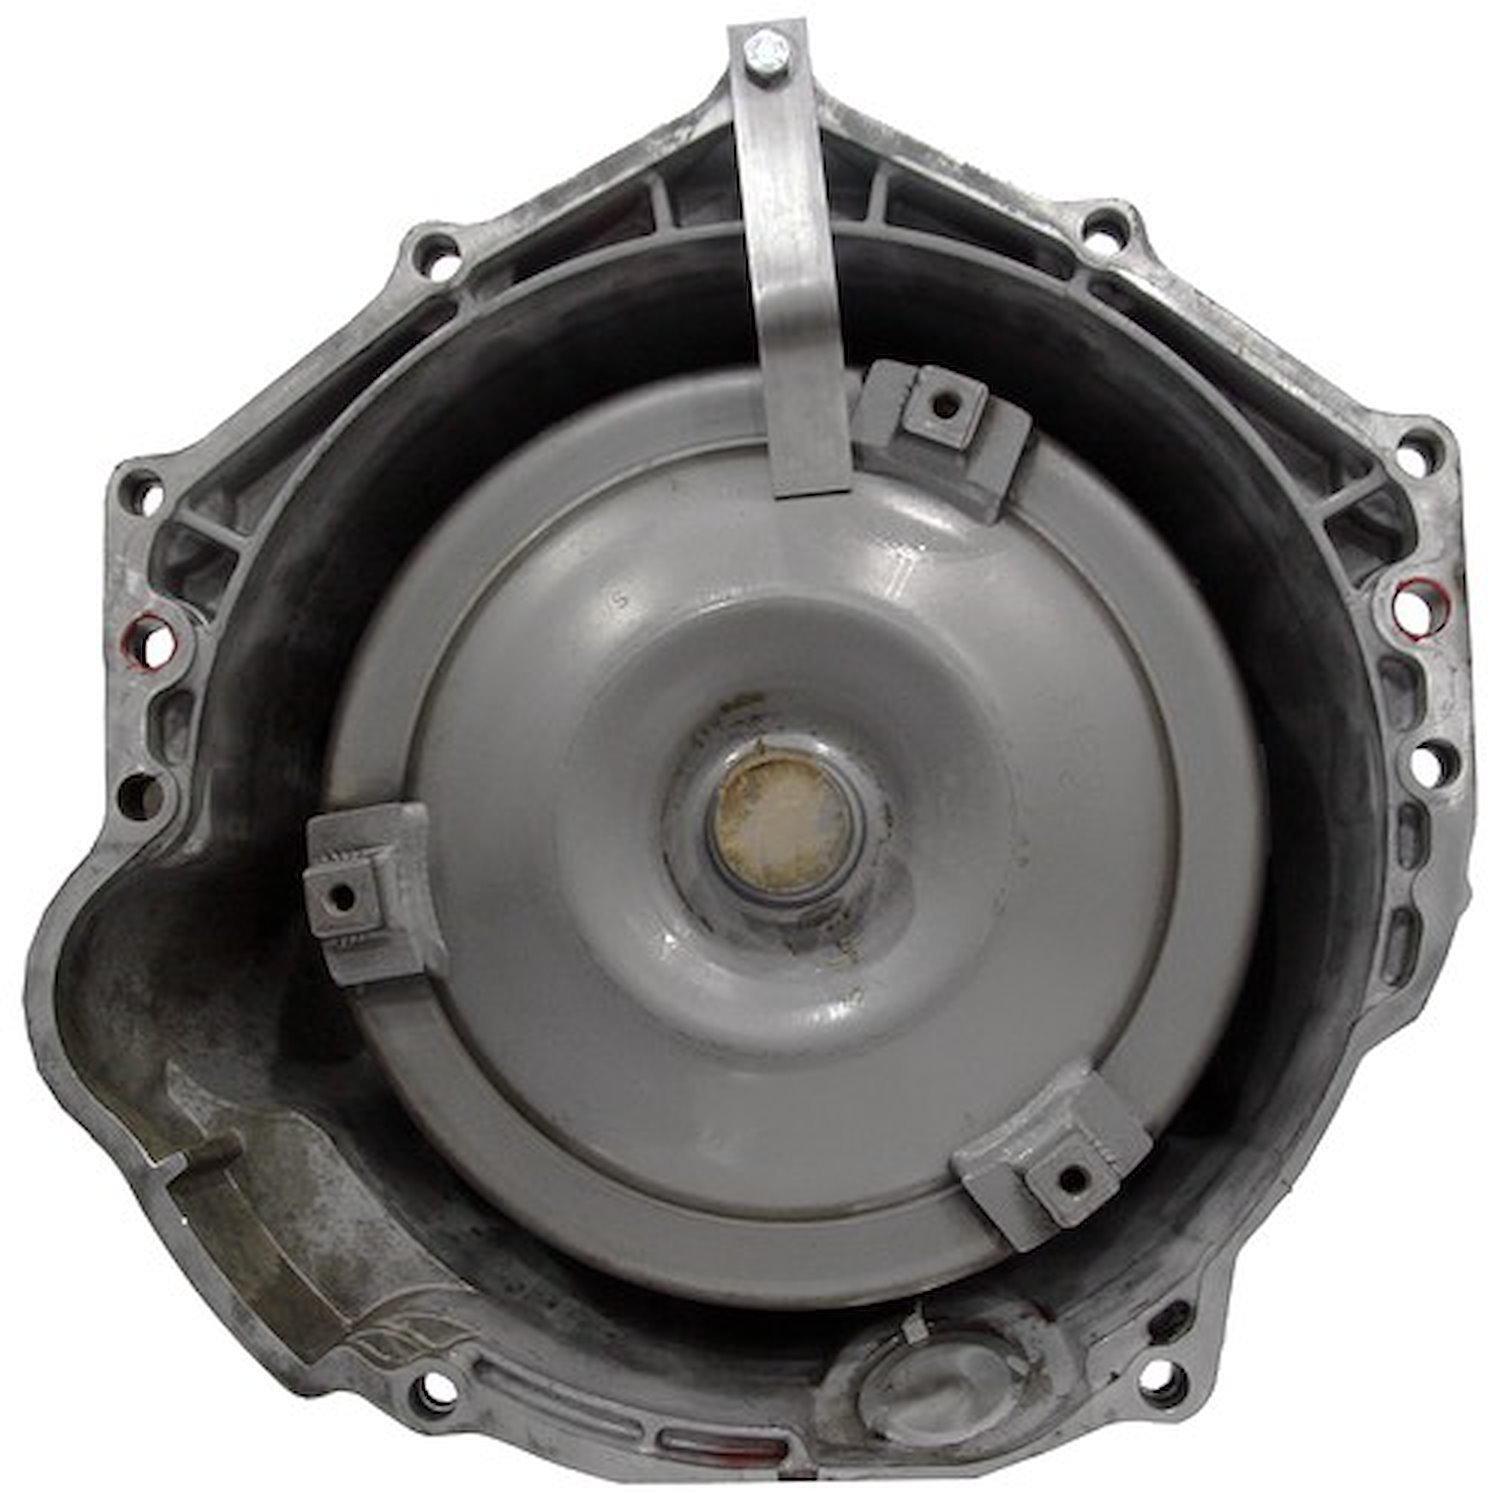 4EAT Reman Auto Trans Fits 2009-2010 Subaru Forester w/2.5L 4cyl. Eng.